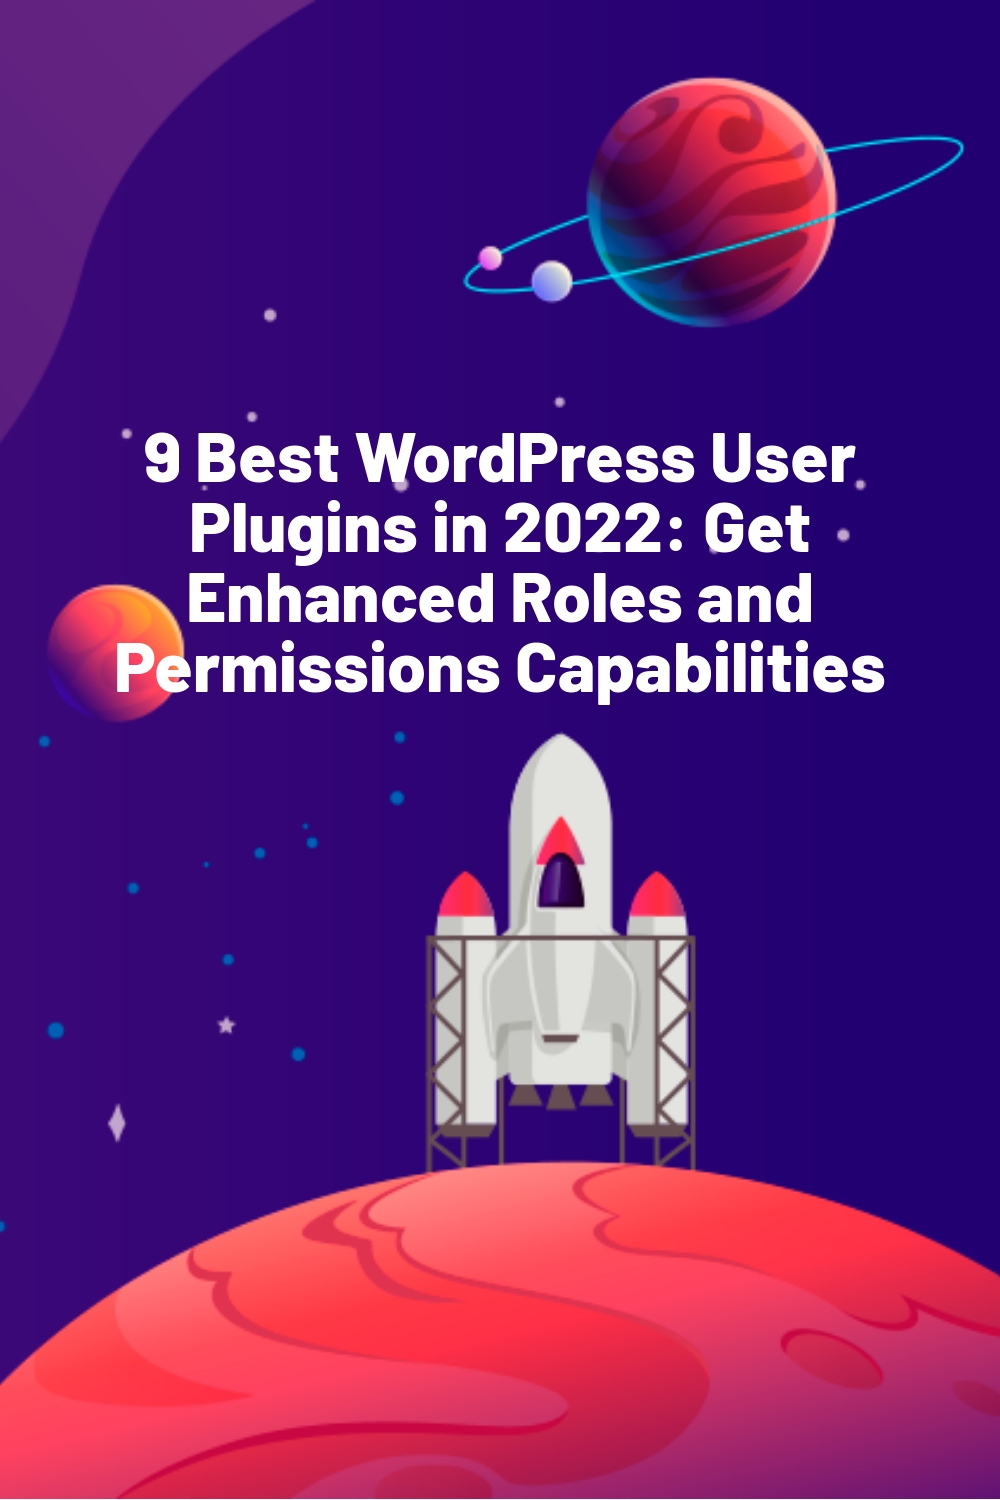 9 Best WordPress User Plugins in 2022: Get Enhanced Roles and Permissions Capabilities